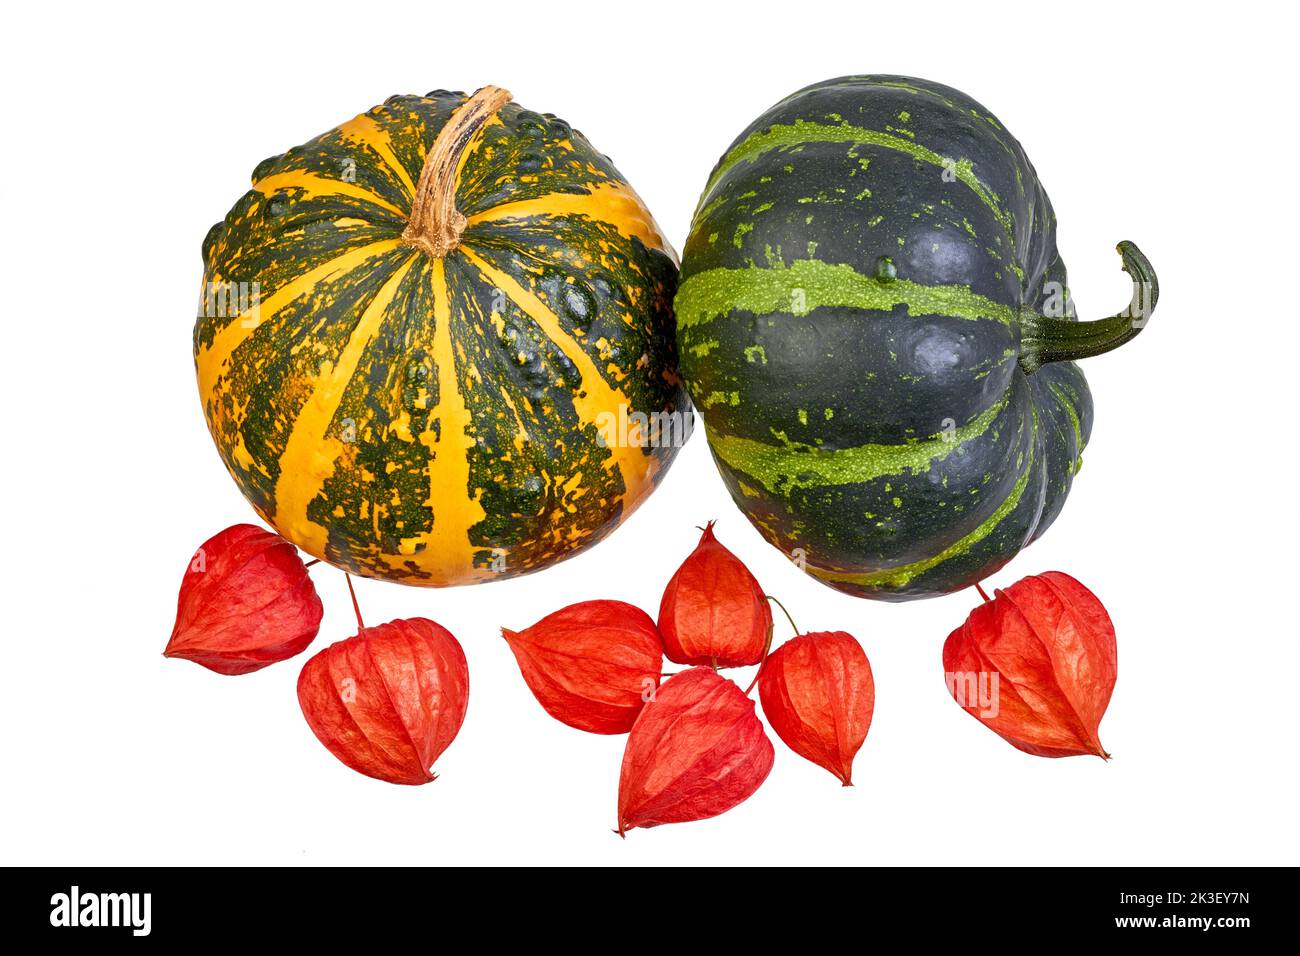 Two decorative pumpkins and physalis fruits isolated on white background Stock Photo